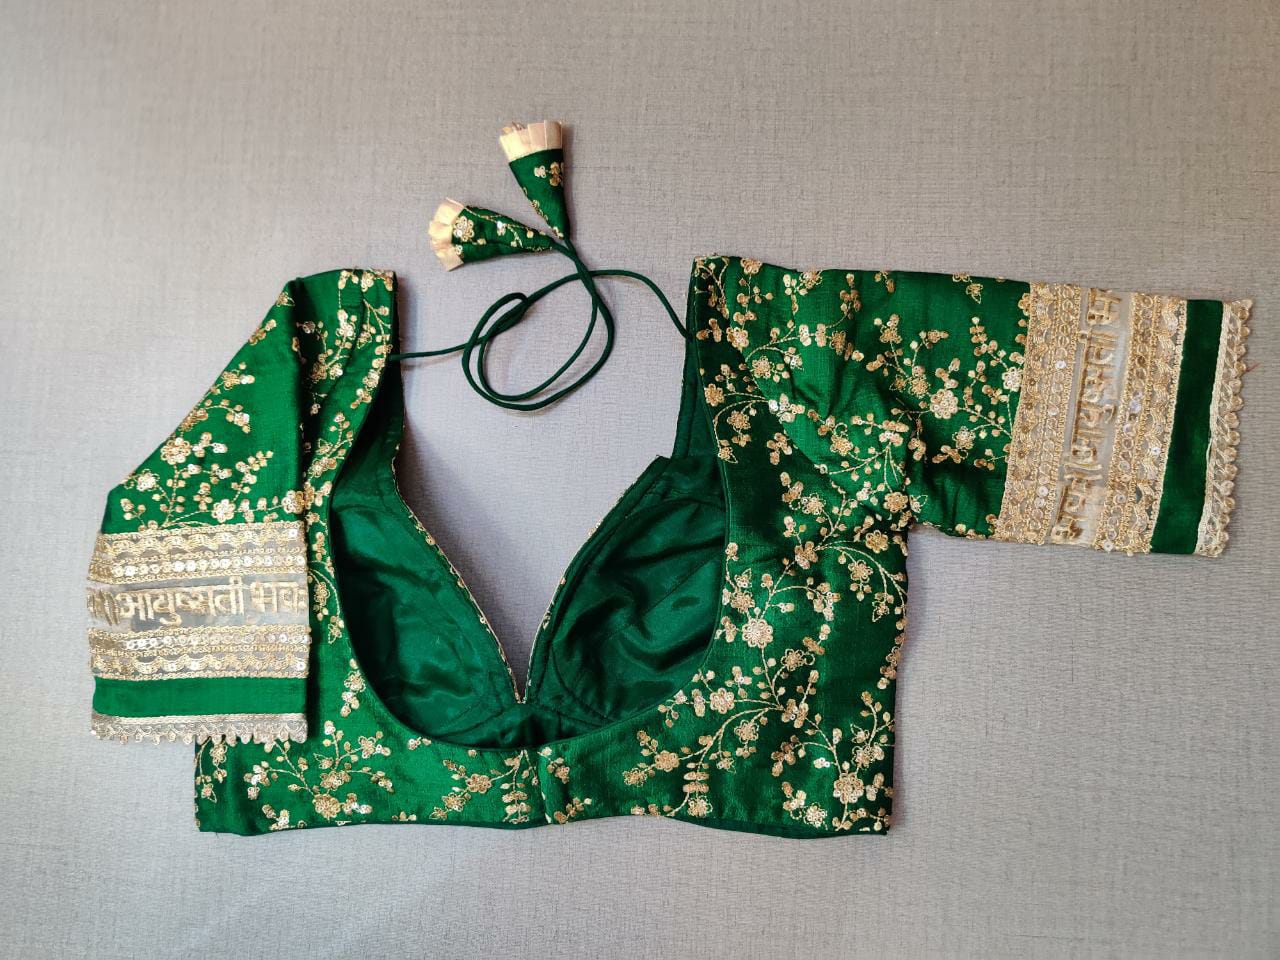 Buy stunning dark green embroidered saree blouse online in USA with mantra sleeves. Elevate your Indian ethnic saree looks with beautiful readymade saree blouse, embroidered saree blouses, Banarasi saree blouse, designer sari blouses, sleeveless saree blouses from Pure Elegance Indian fashion store in USA.-back